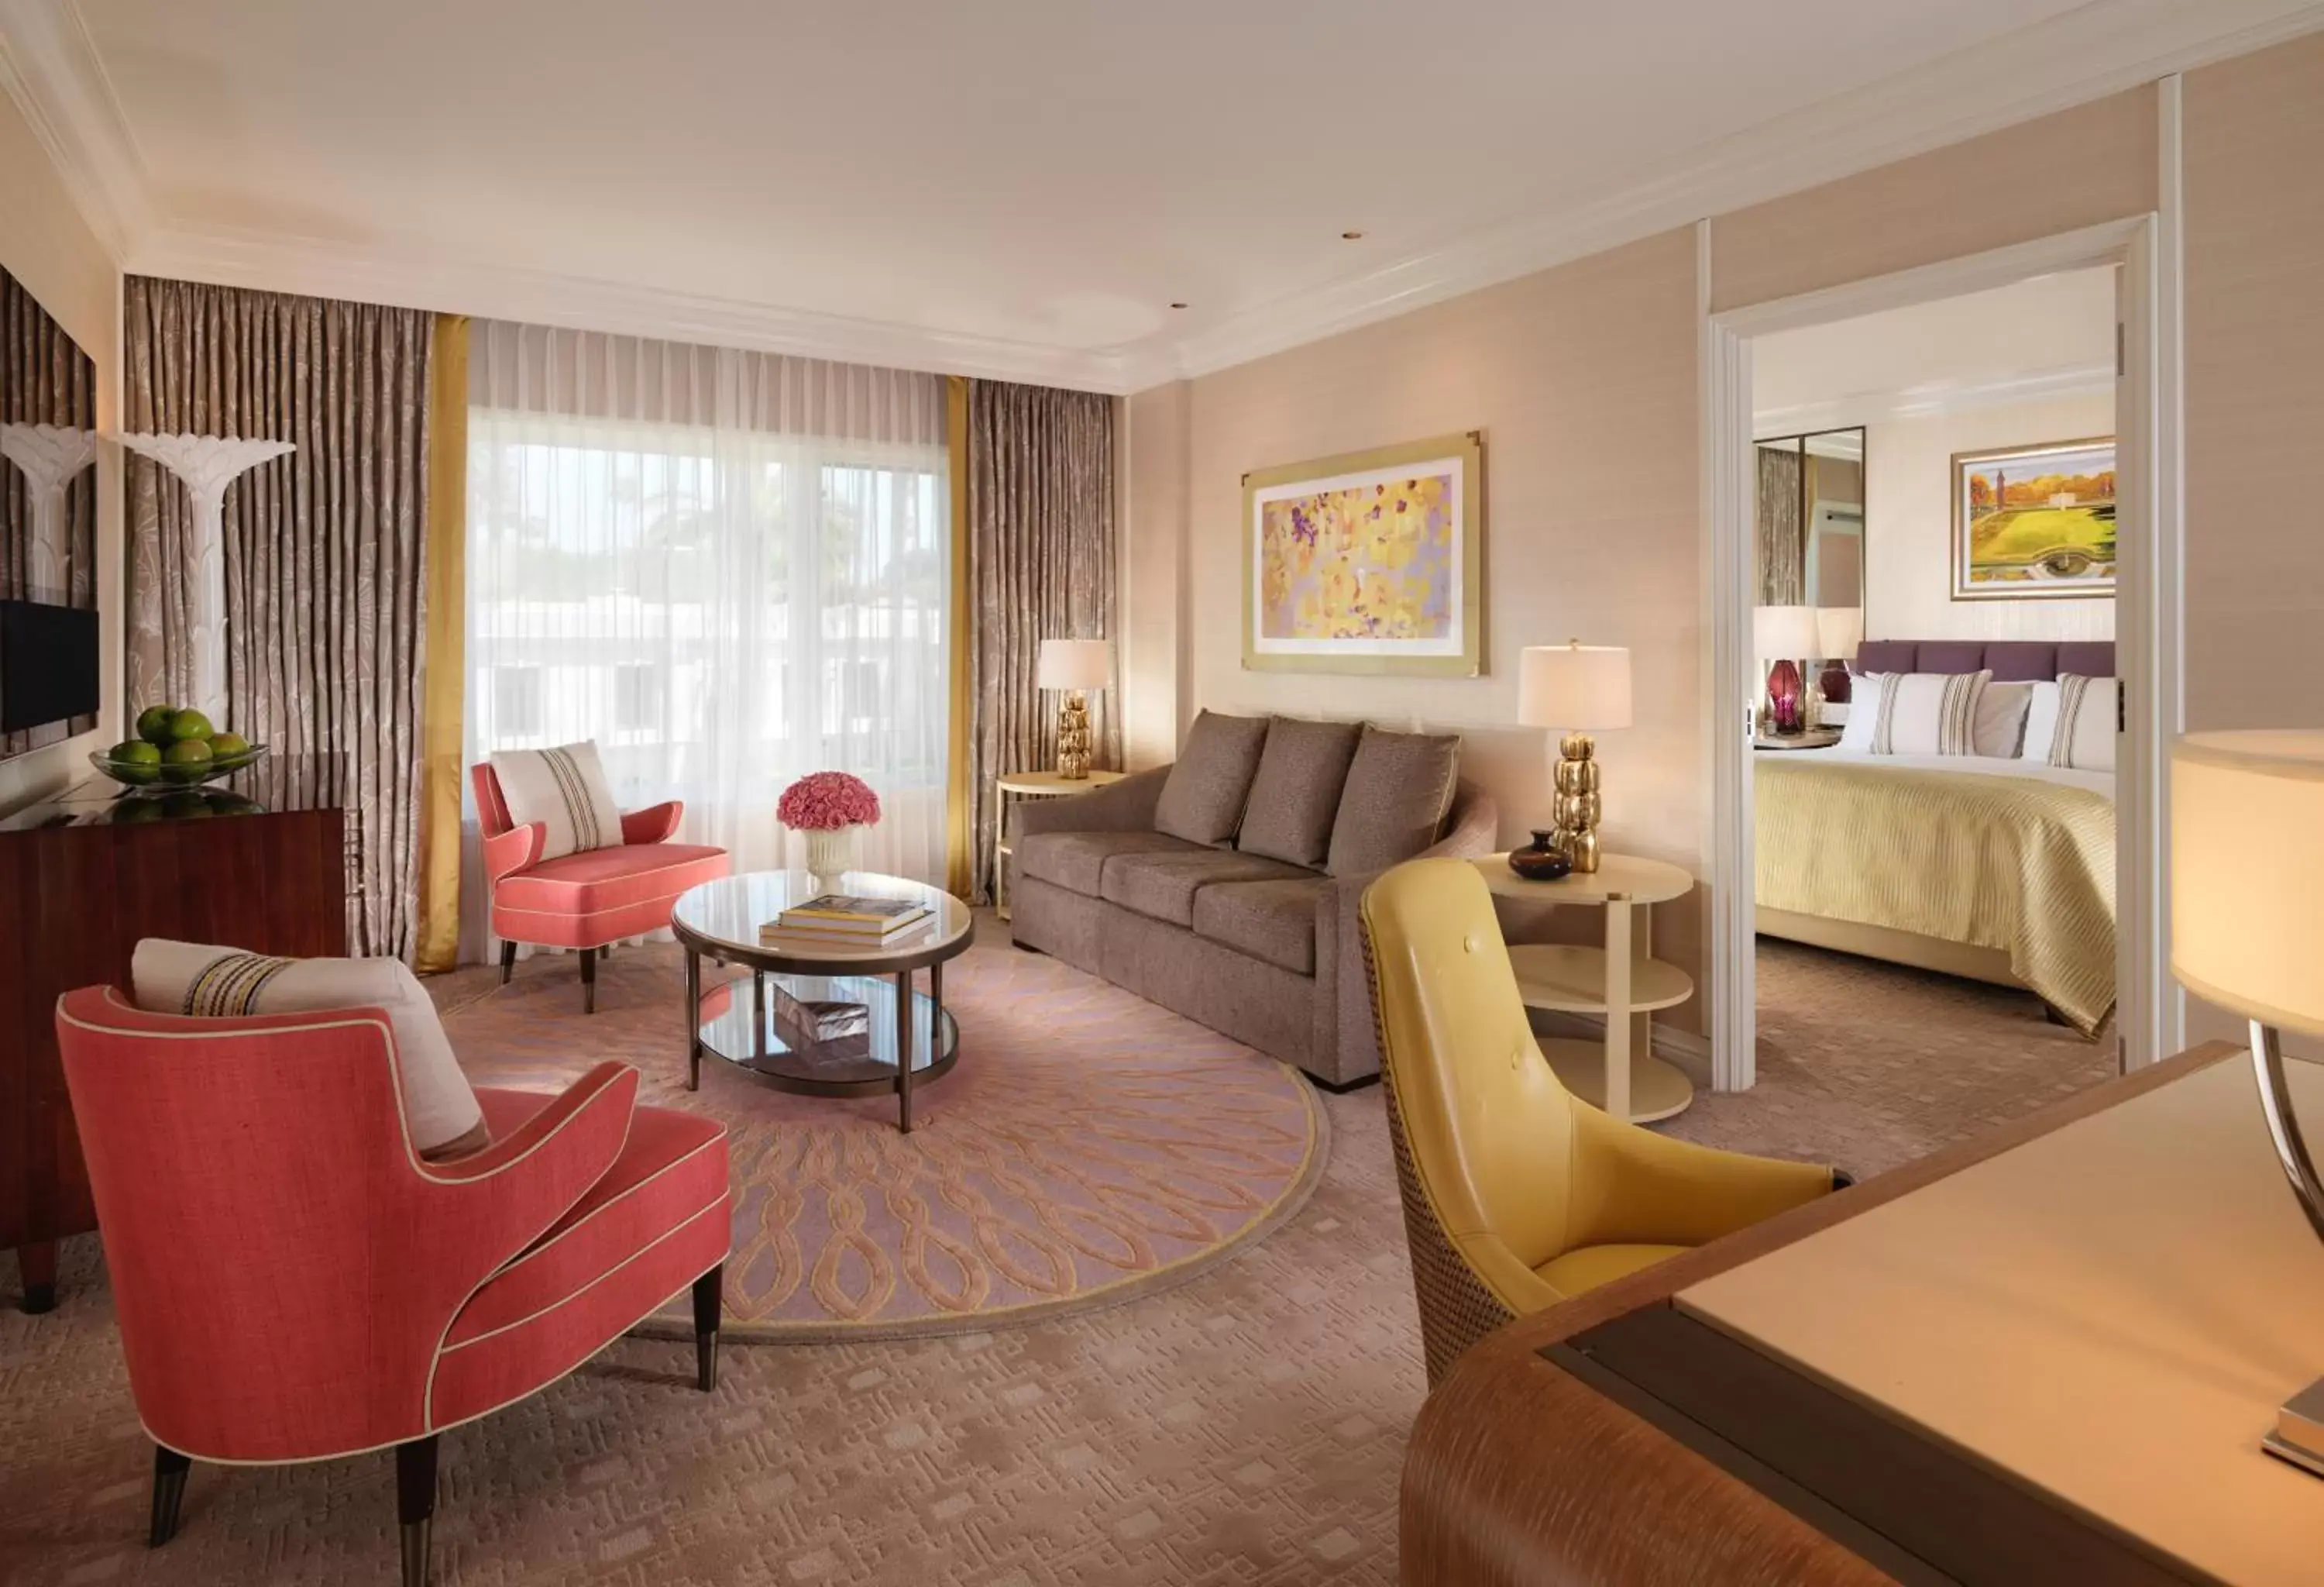 Junior Beverly Hills Suite in The Beverly Hills Hotel - Dorchester Collection